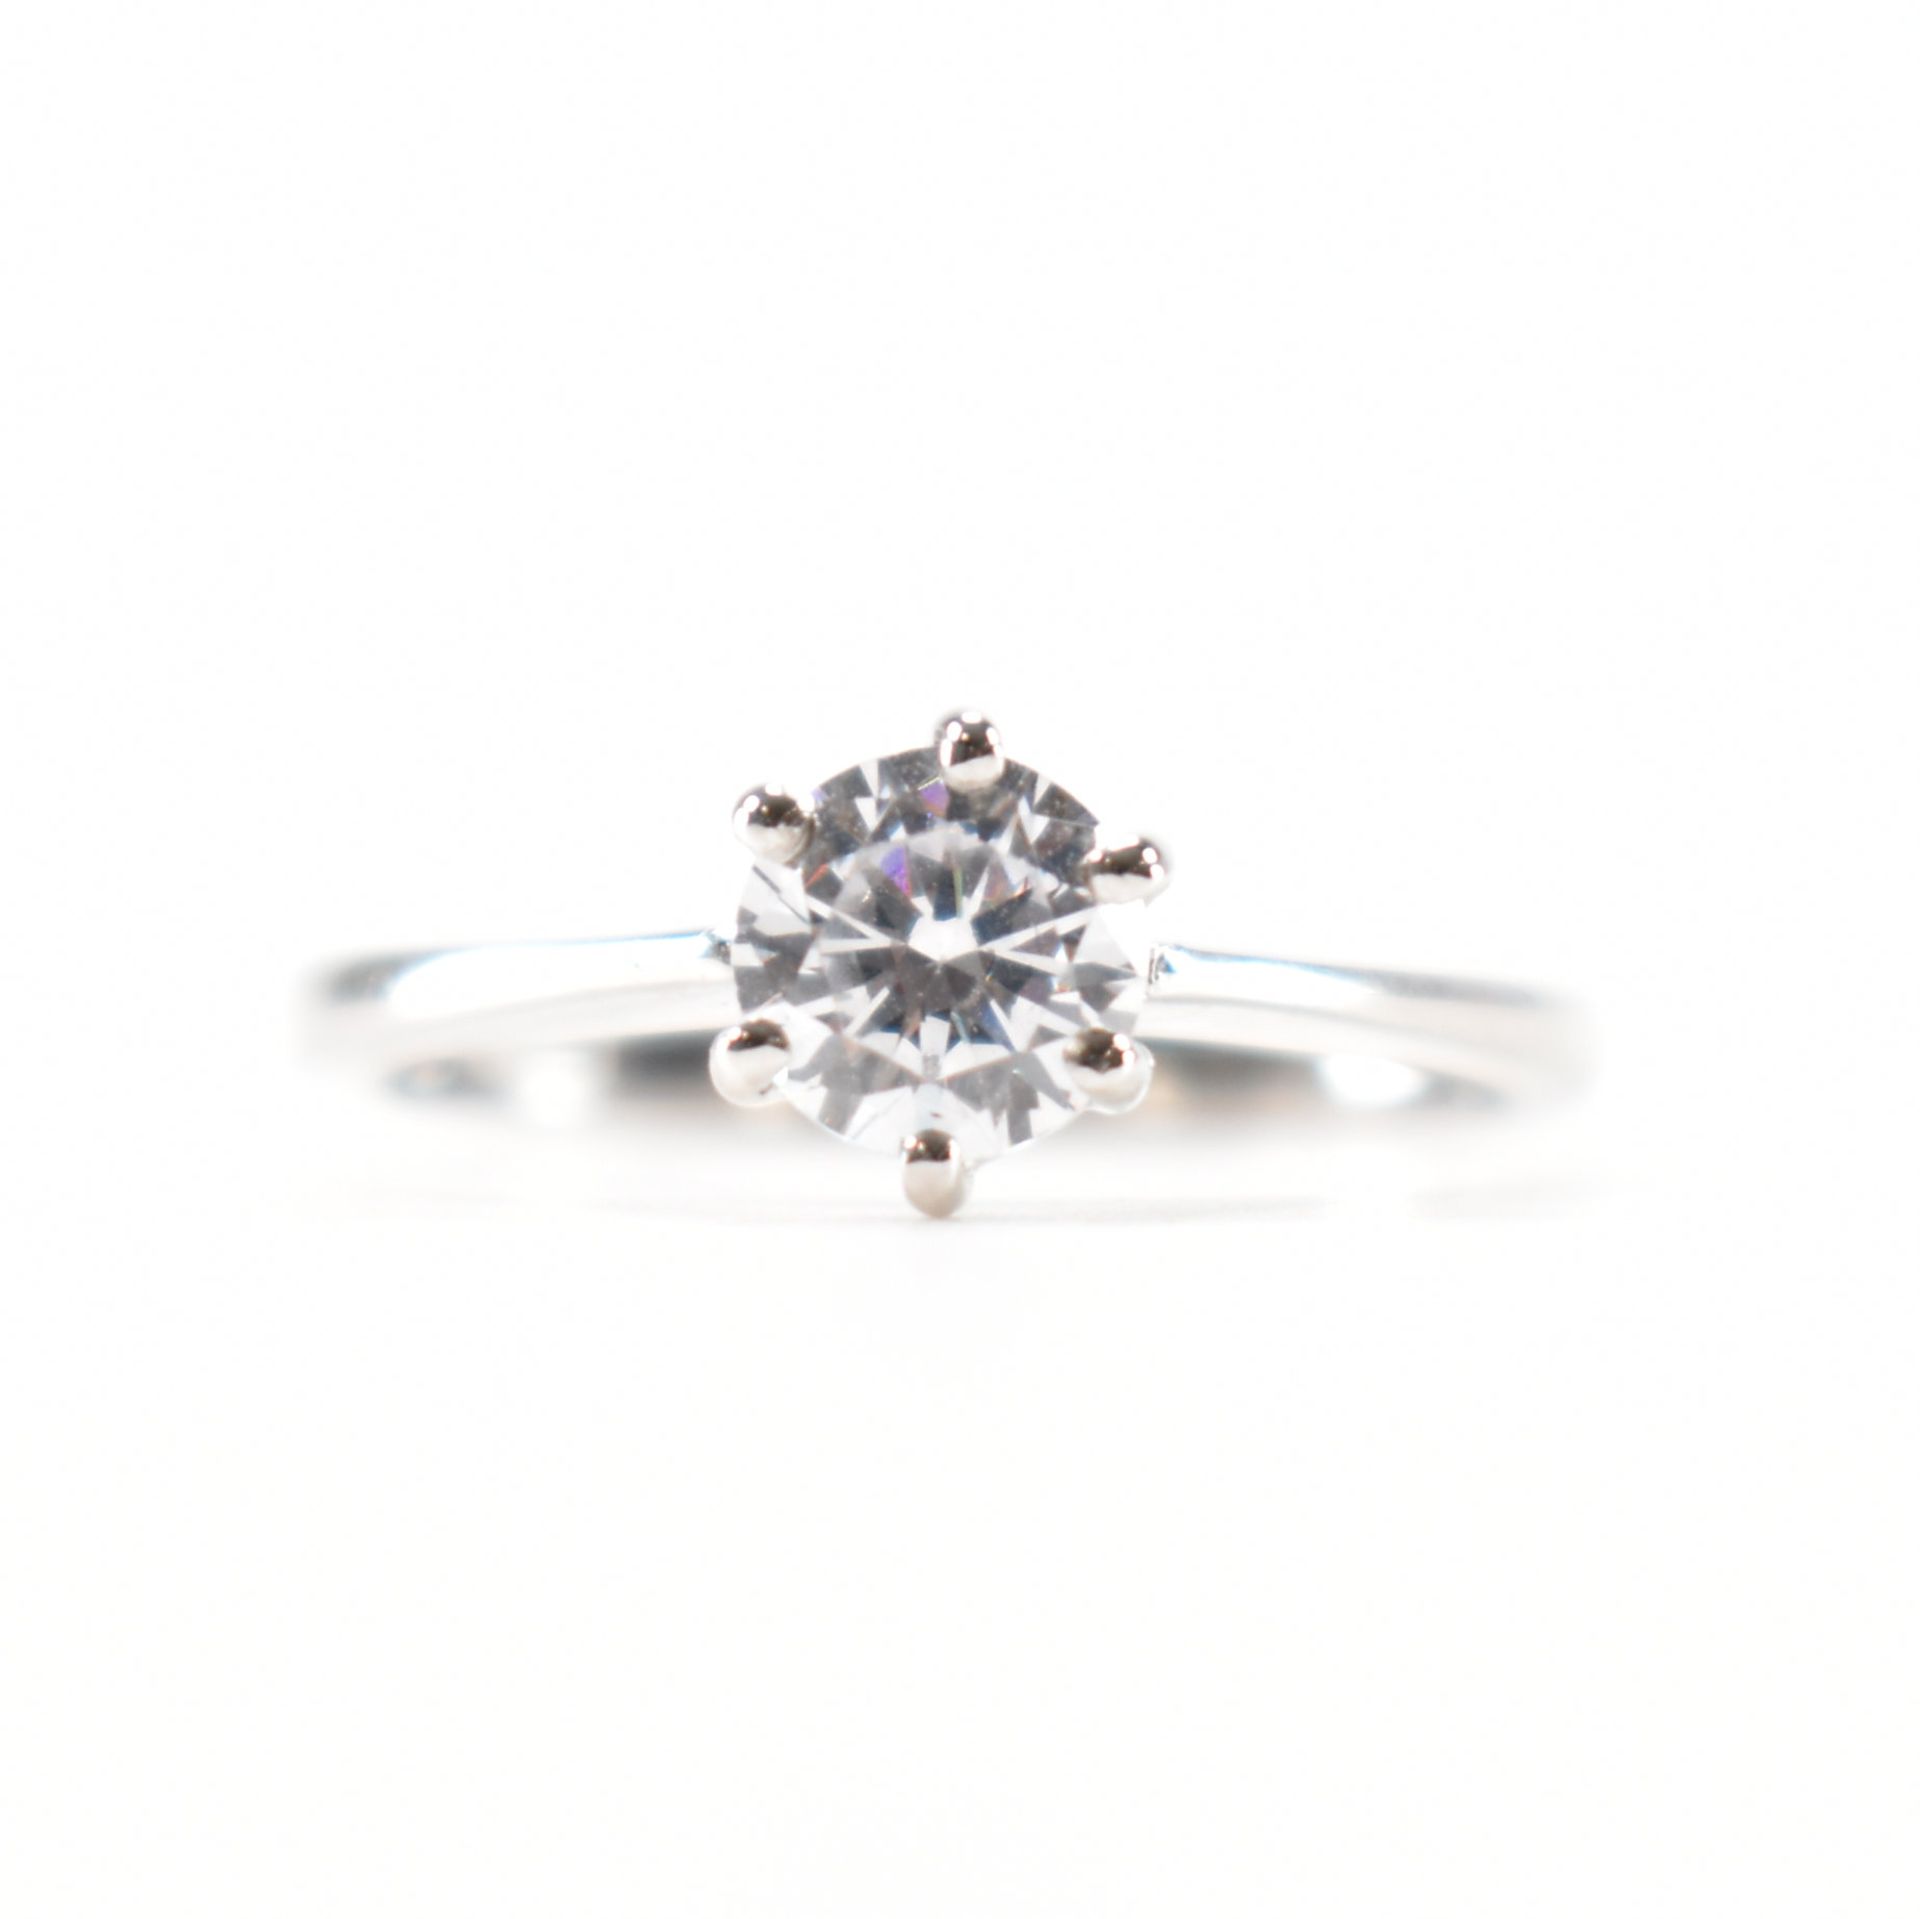 HALLMARKED 18CT GOLD & CZ SOLITAIRE RING